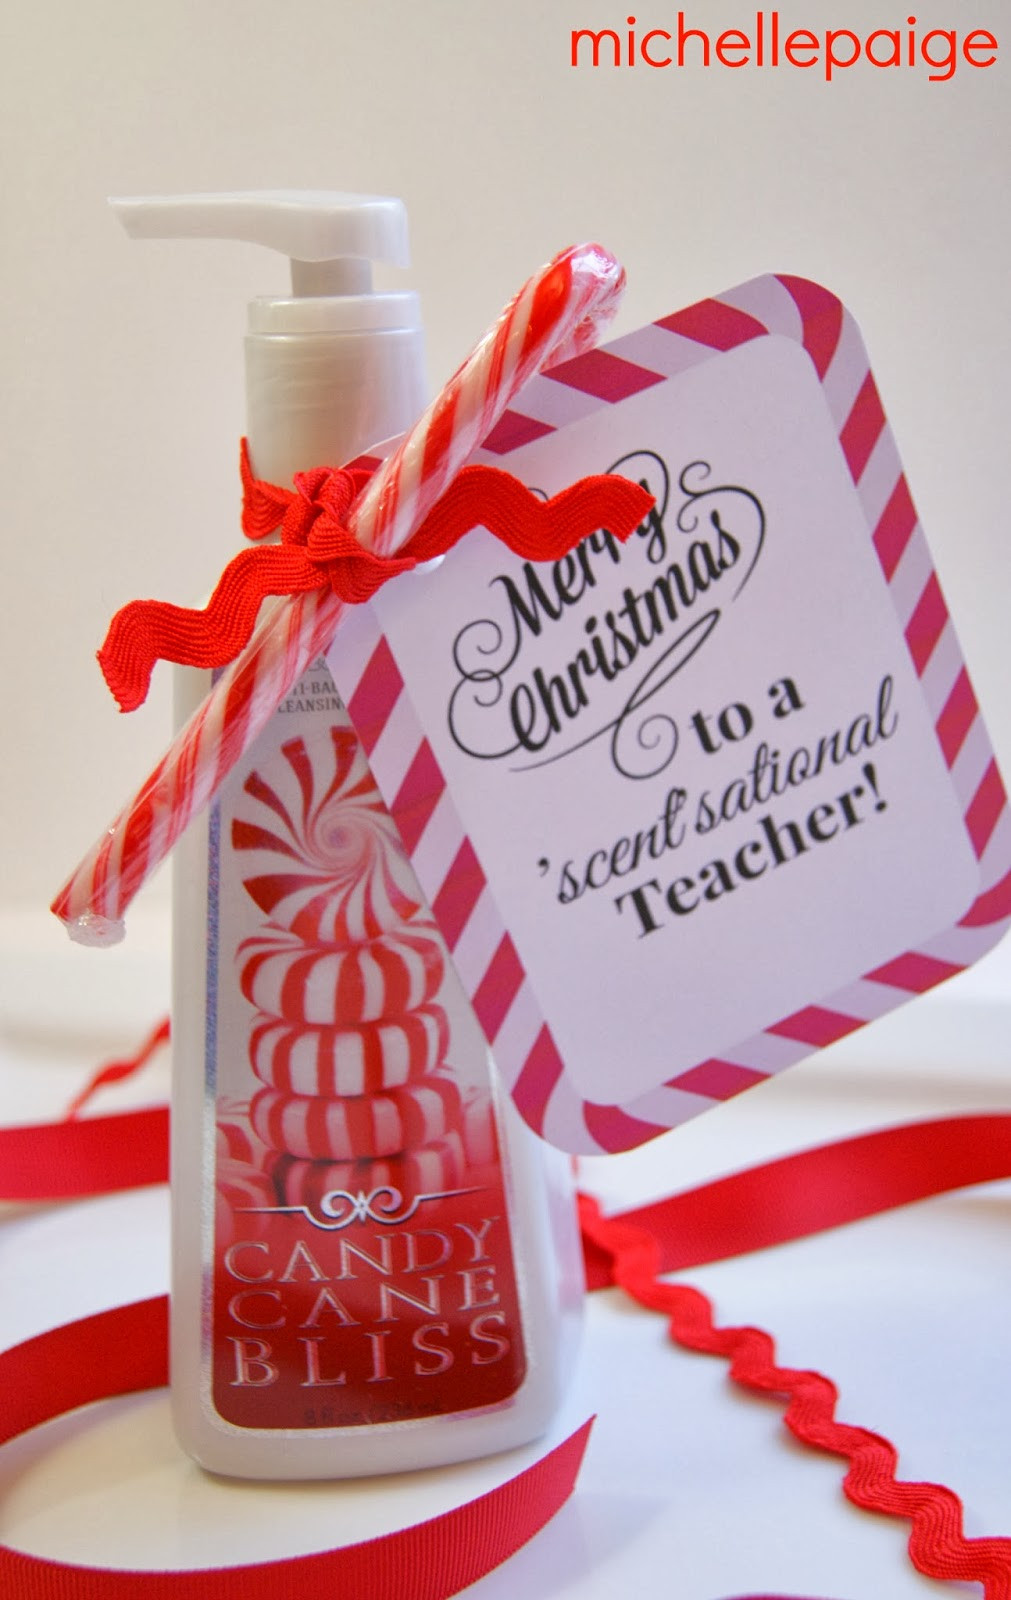 Holiday Teacher Gift Ideas
 michelle paige blogs Quick Teacher Soap Gift for Christmas